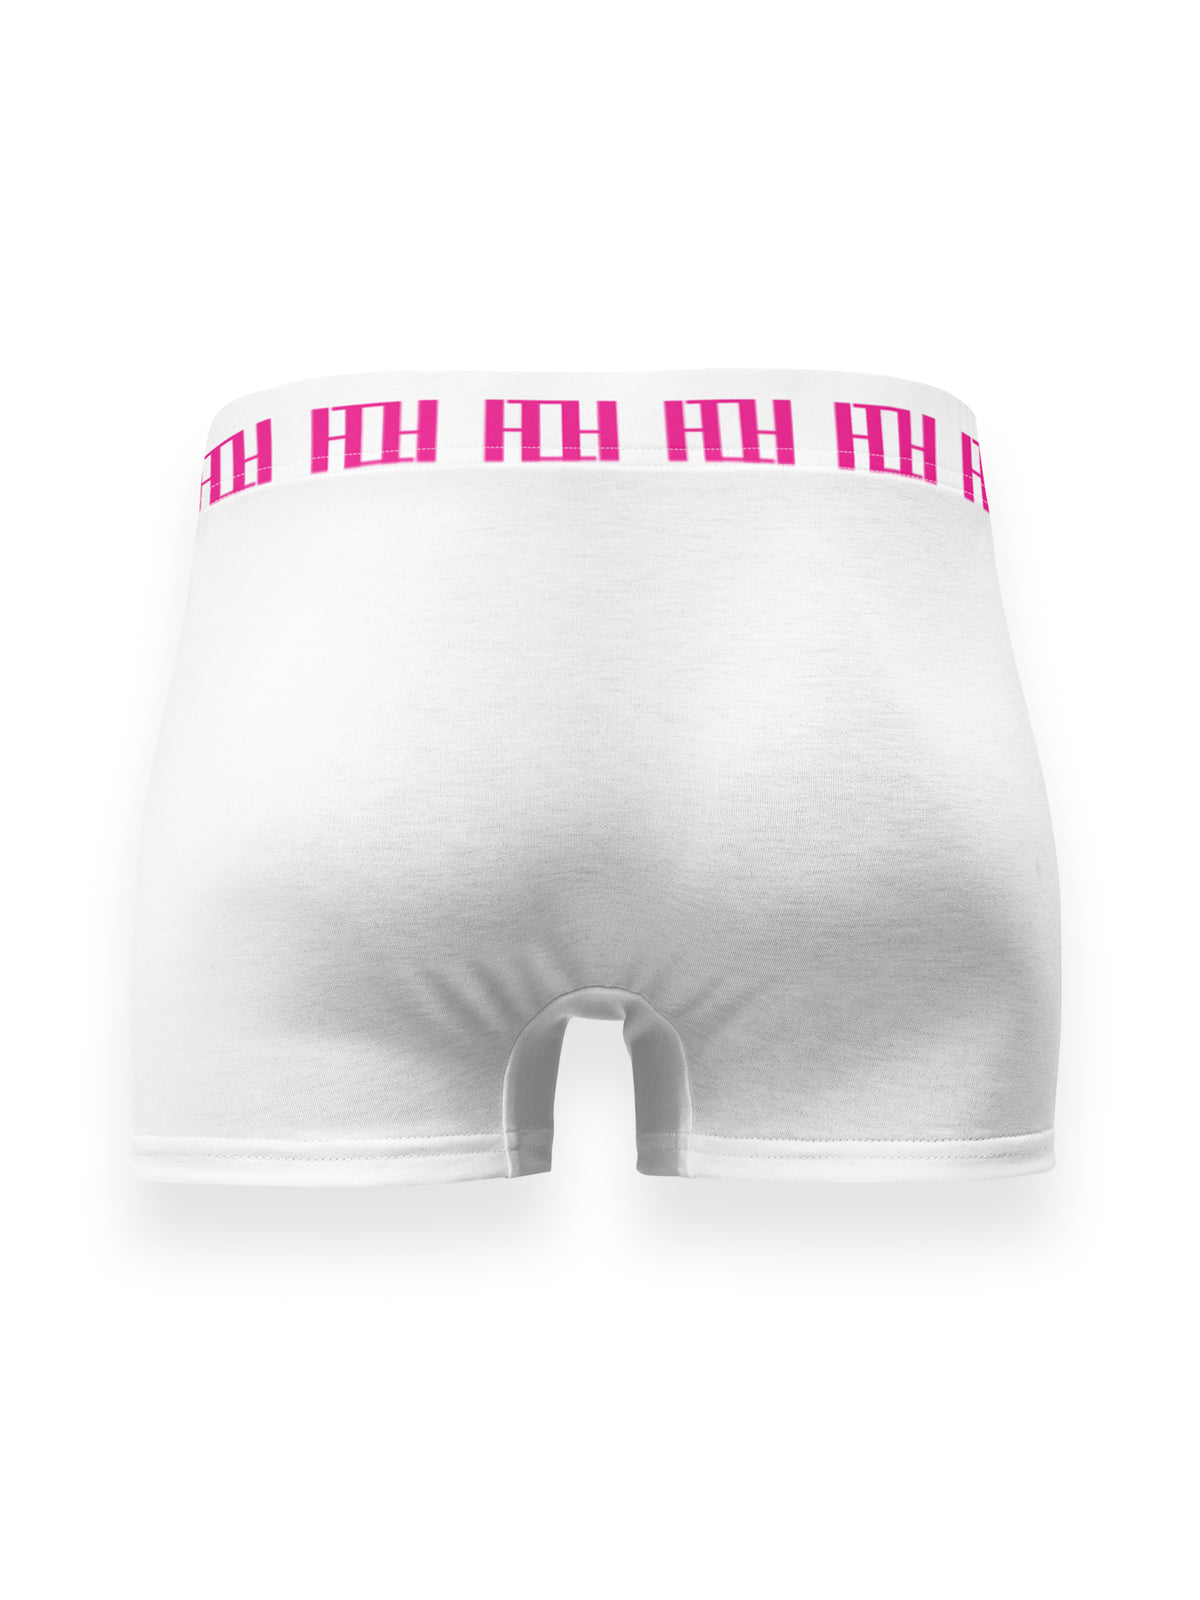 Unisex Boxer Briefs White and Berry